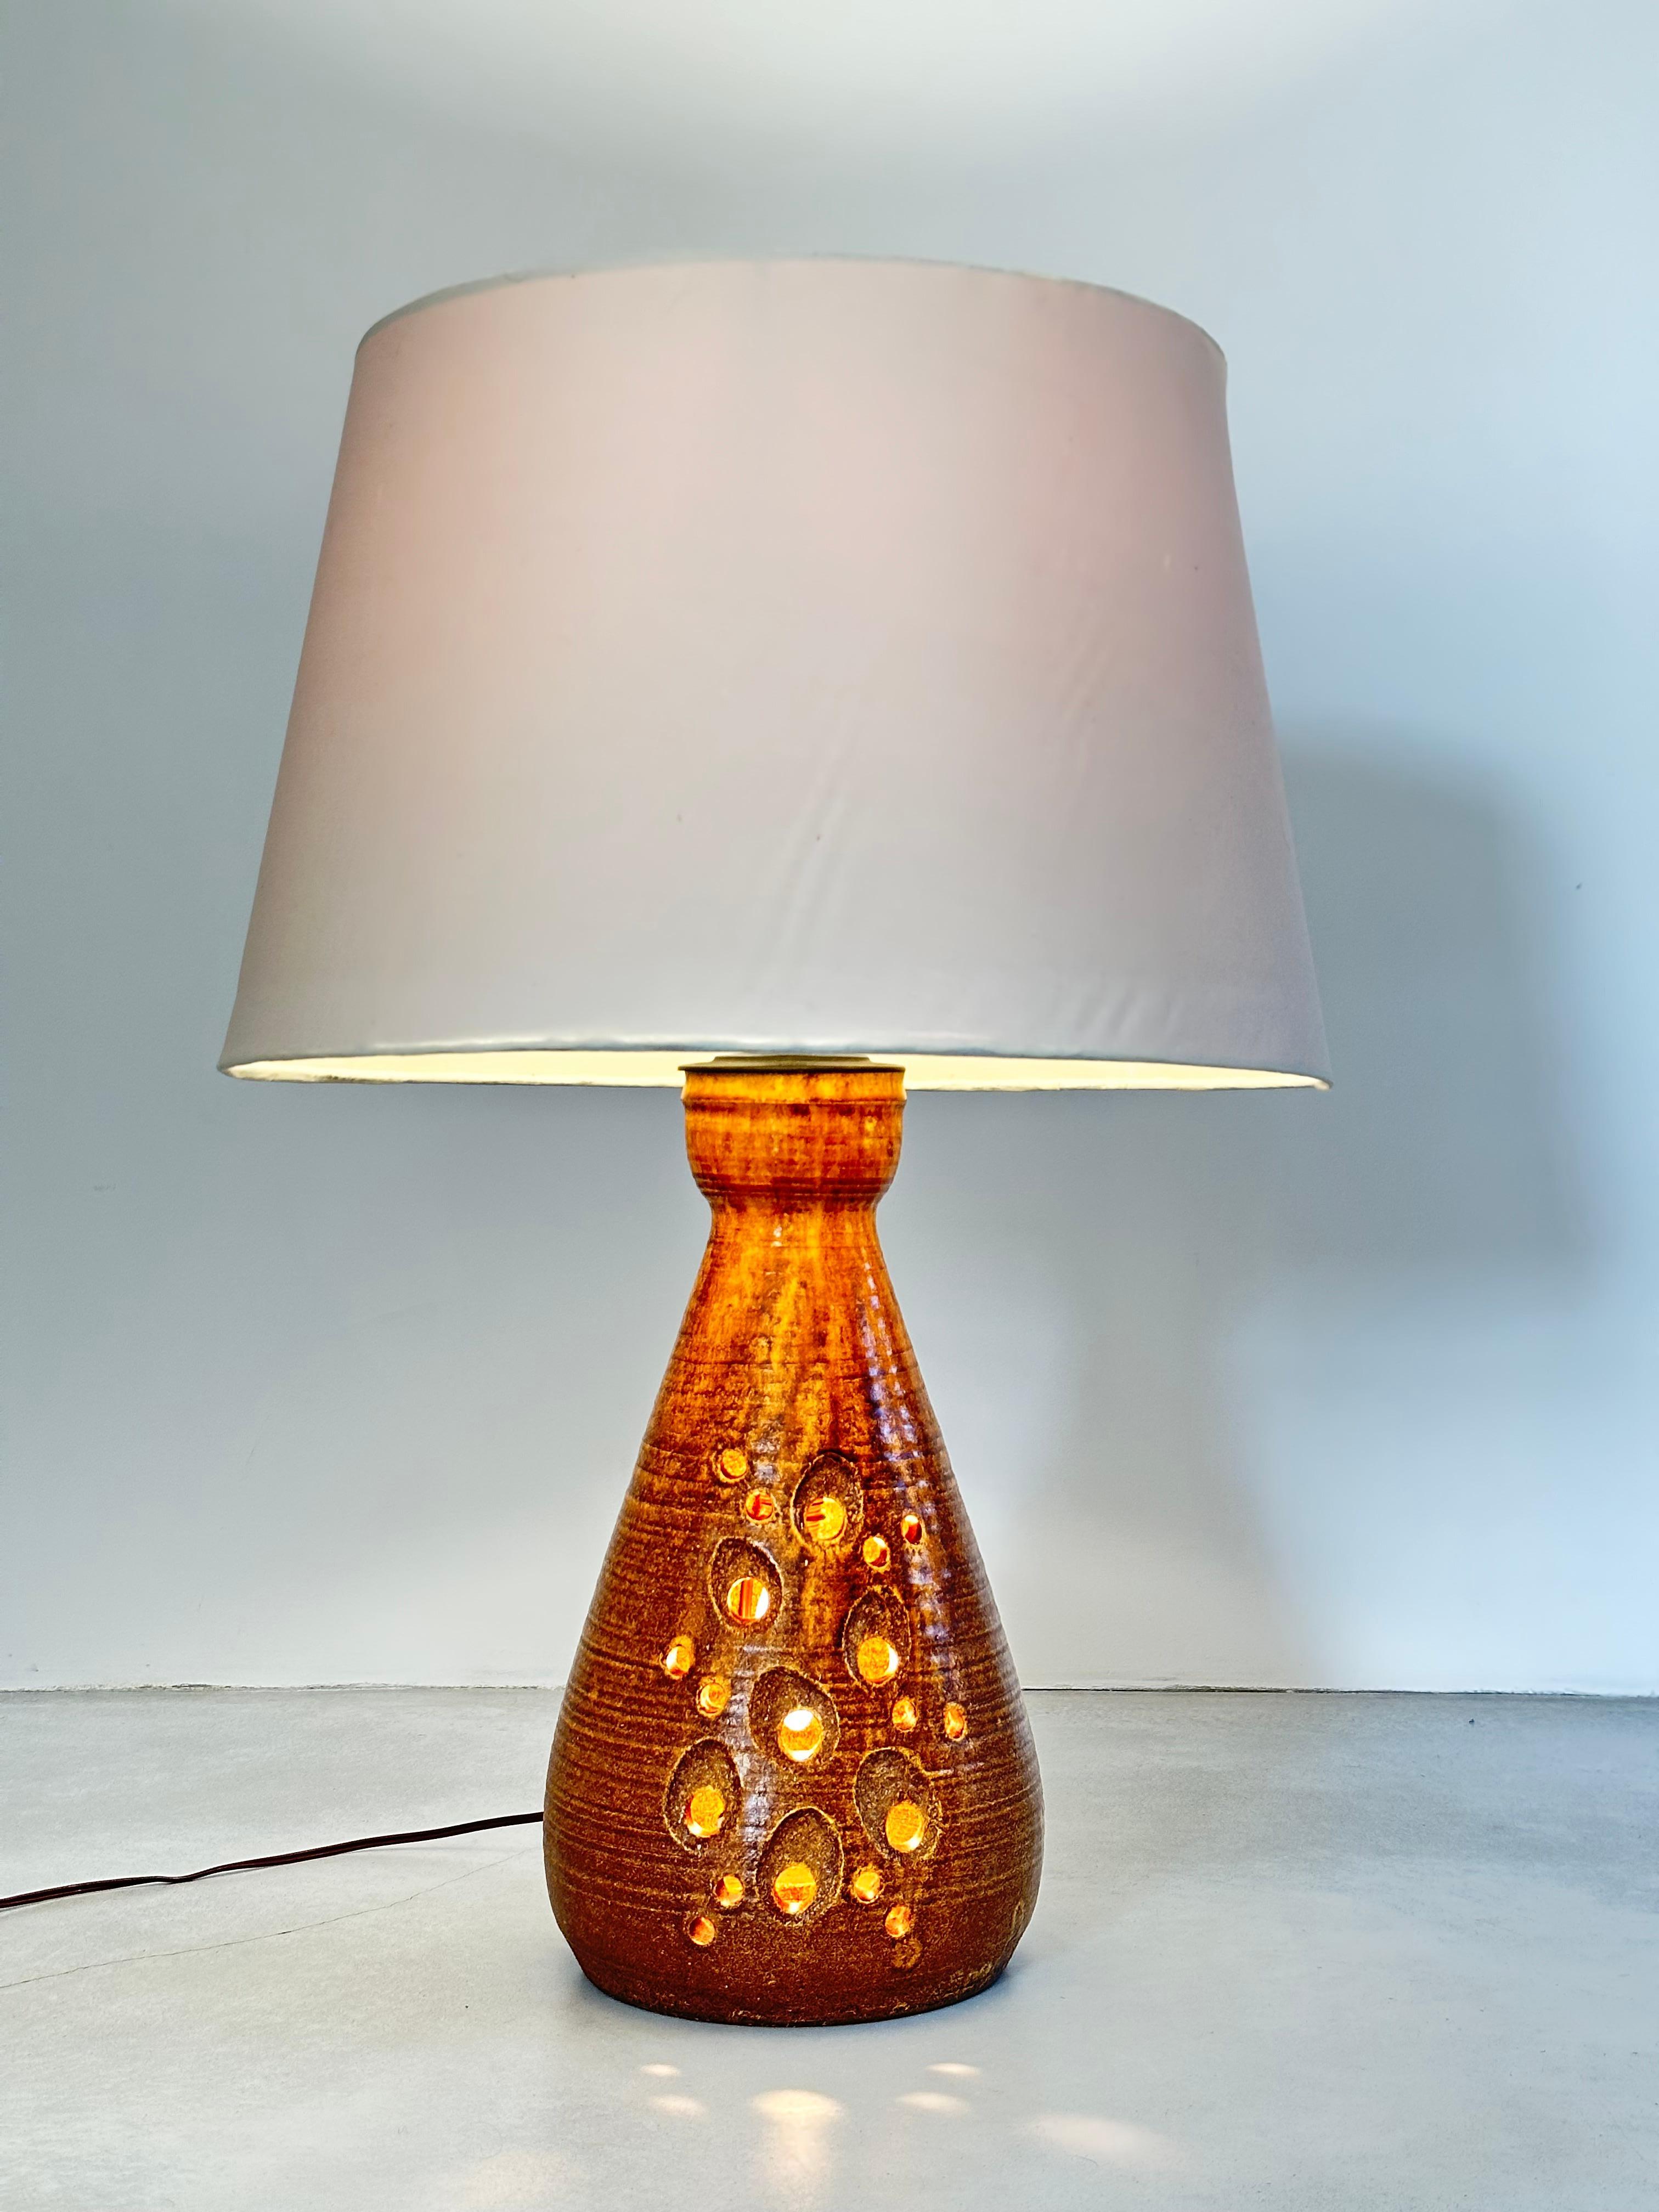 Large fawn-colored enameled sandstone lamp.

The body of the lamp is perforated in several places through which the double lighting diffuses a poetic light.

the lamp is signed 